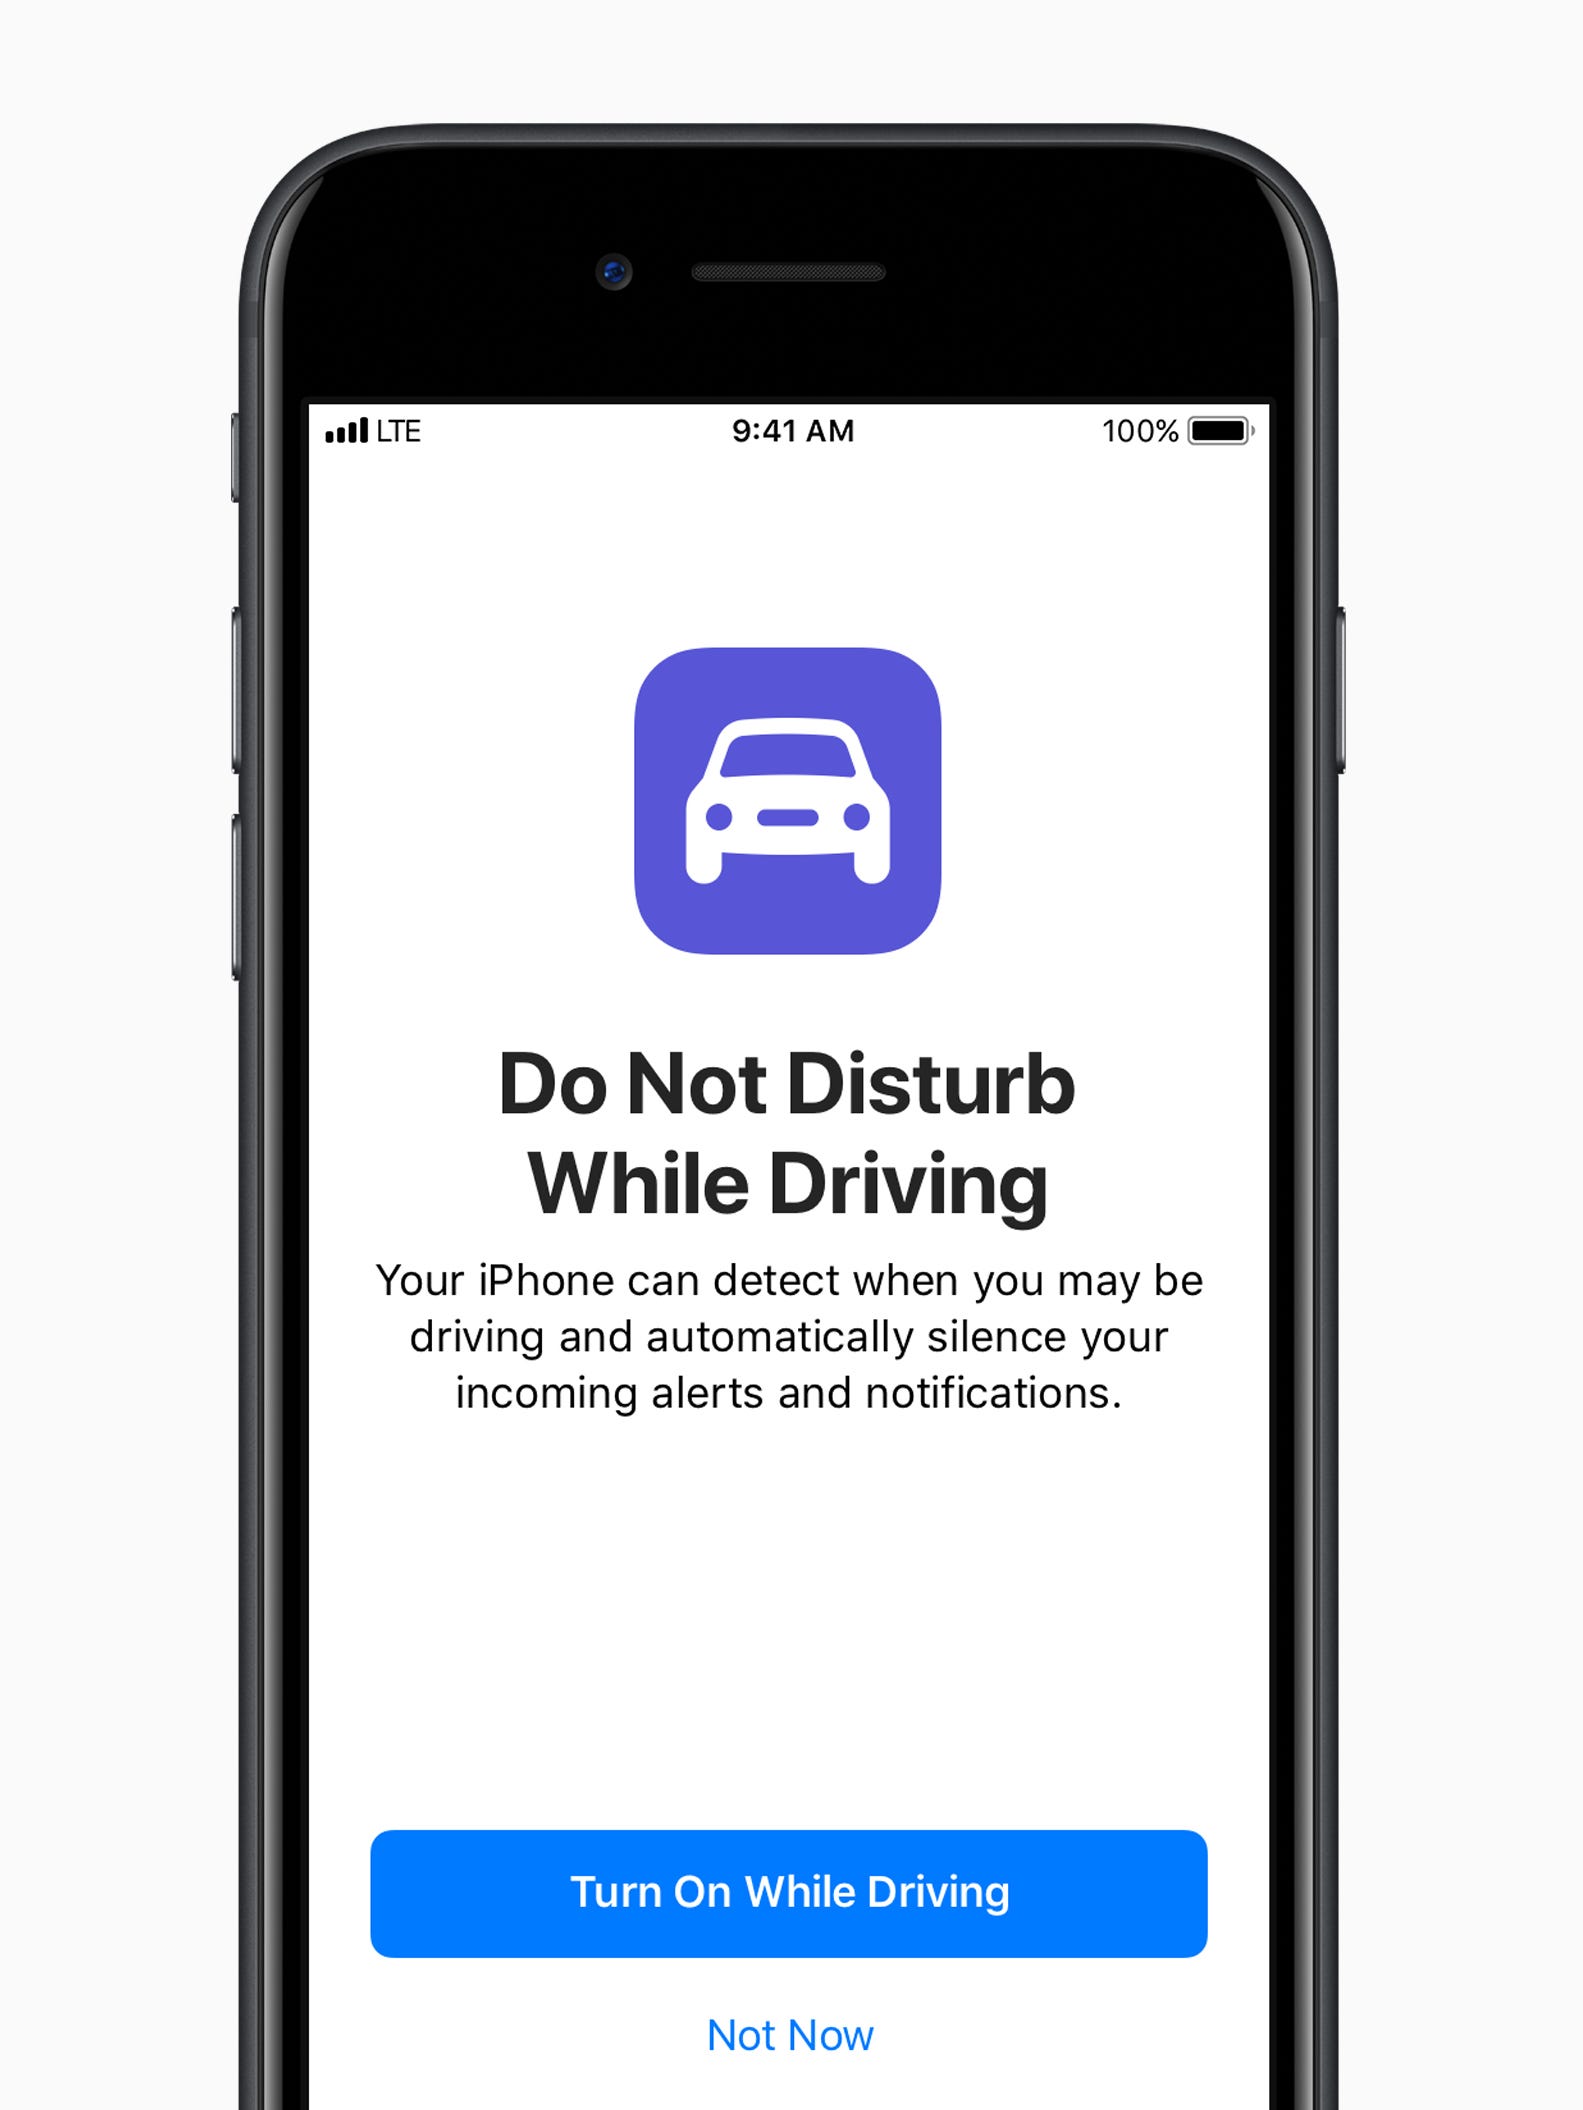 Apple's new mobile operating system for iPhones and iPads -- iOS 11, coming this fall -- lets drivers enact a Do Not Disturb while driving mode.